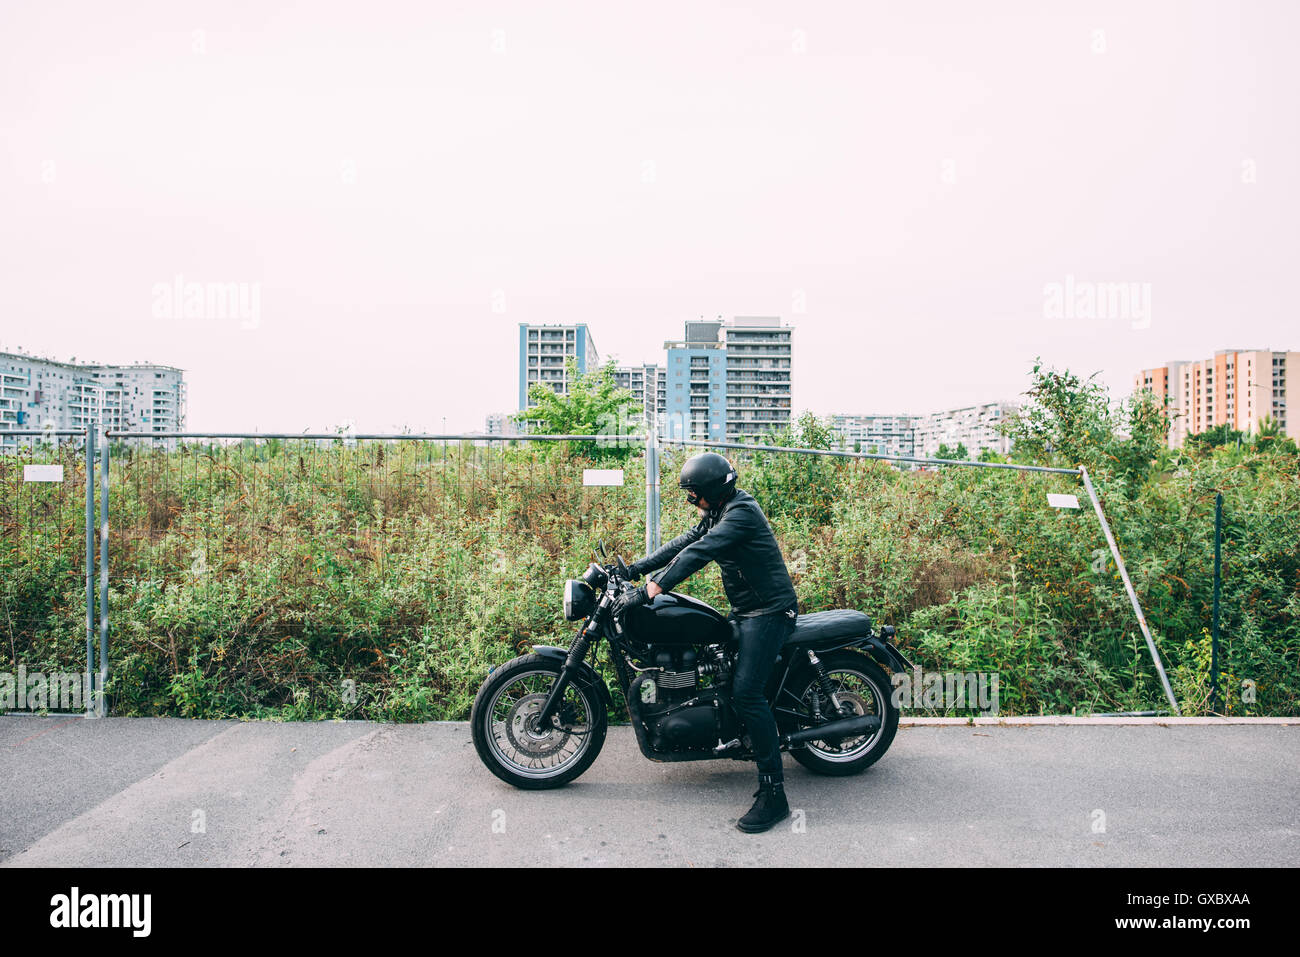 Mature male motorcyclist wearing black sitting on motorcycle on road Stock Photo